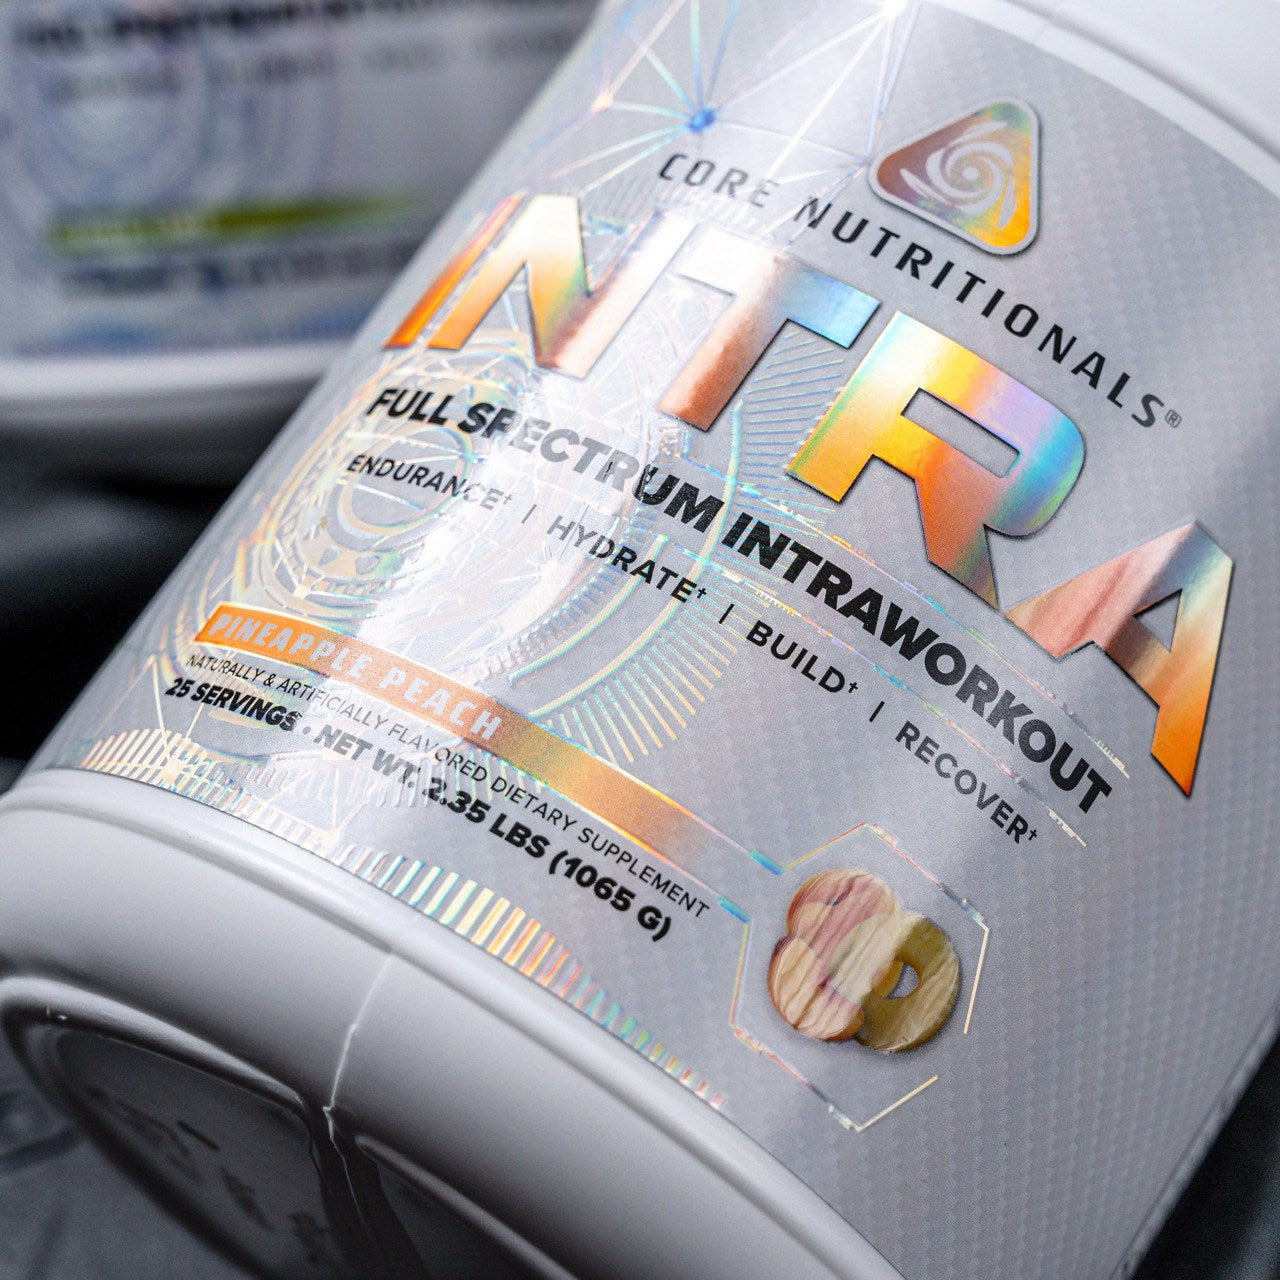 Pineapple Peach Core Nutritionals Intra Coalition Nutrition